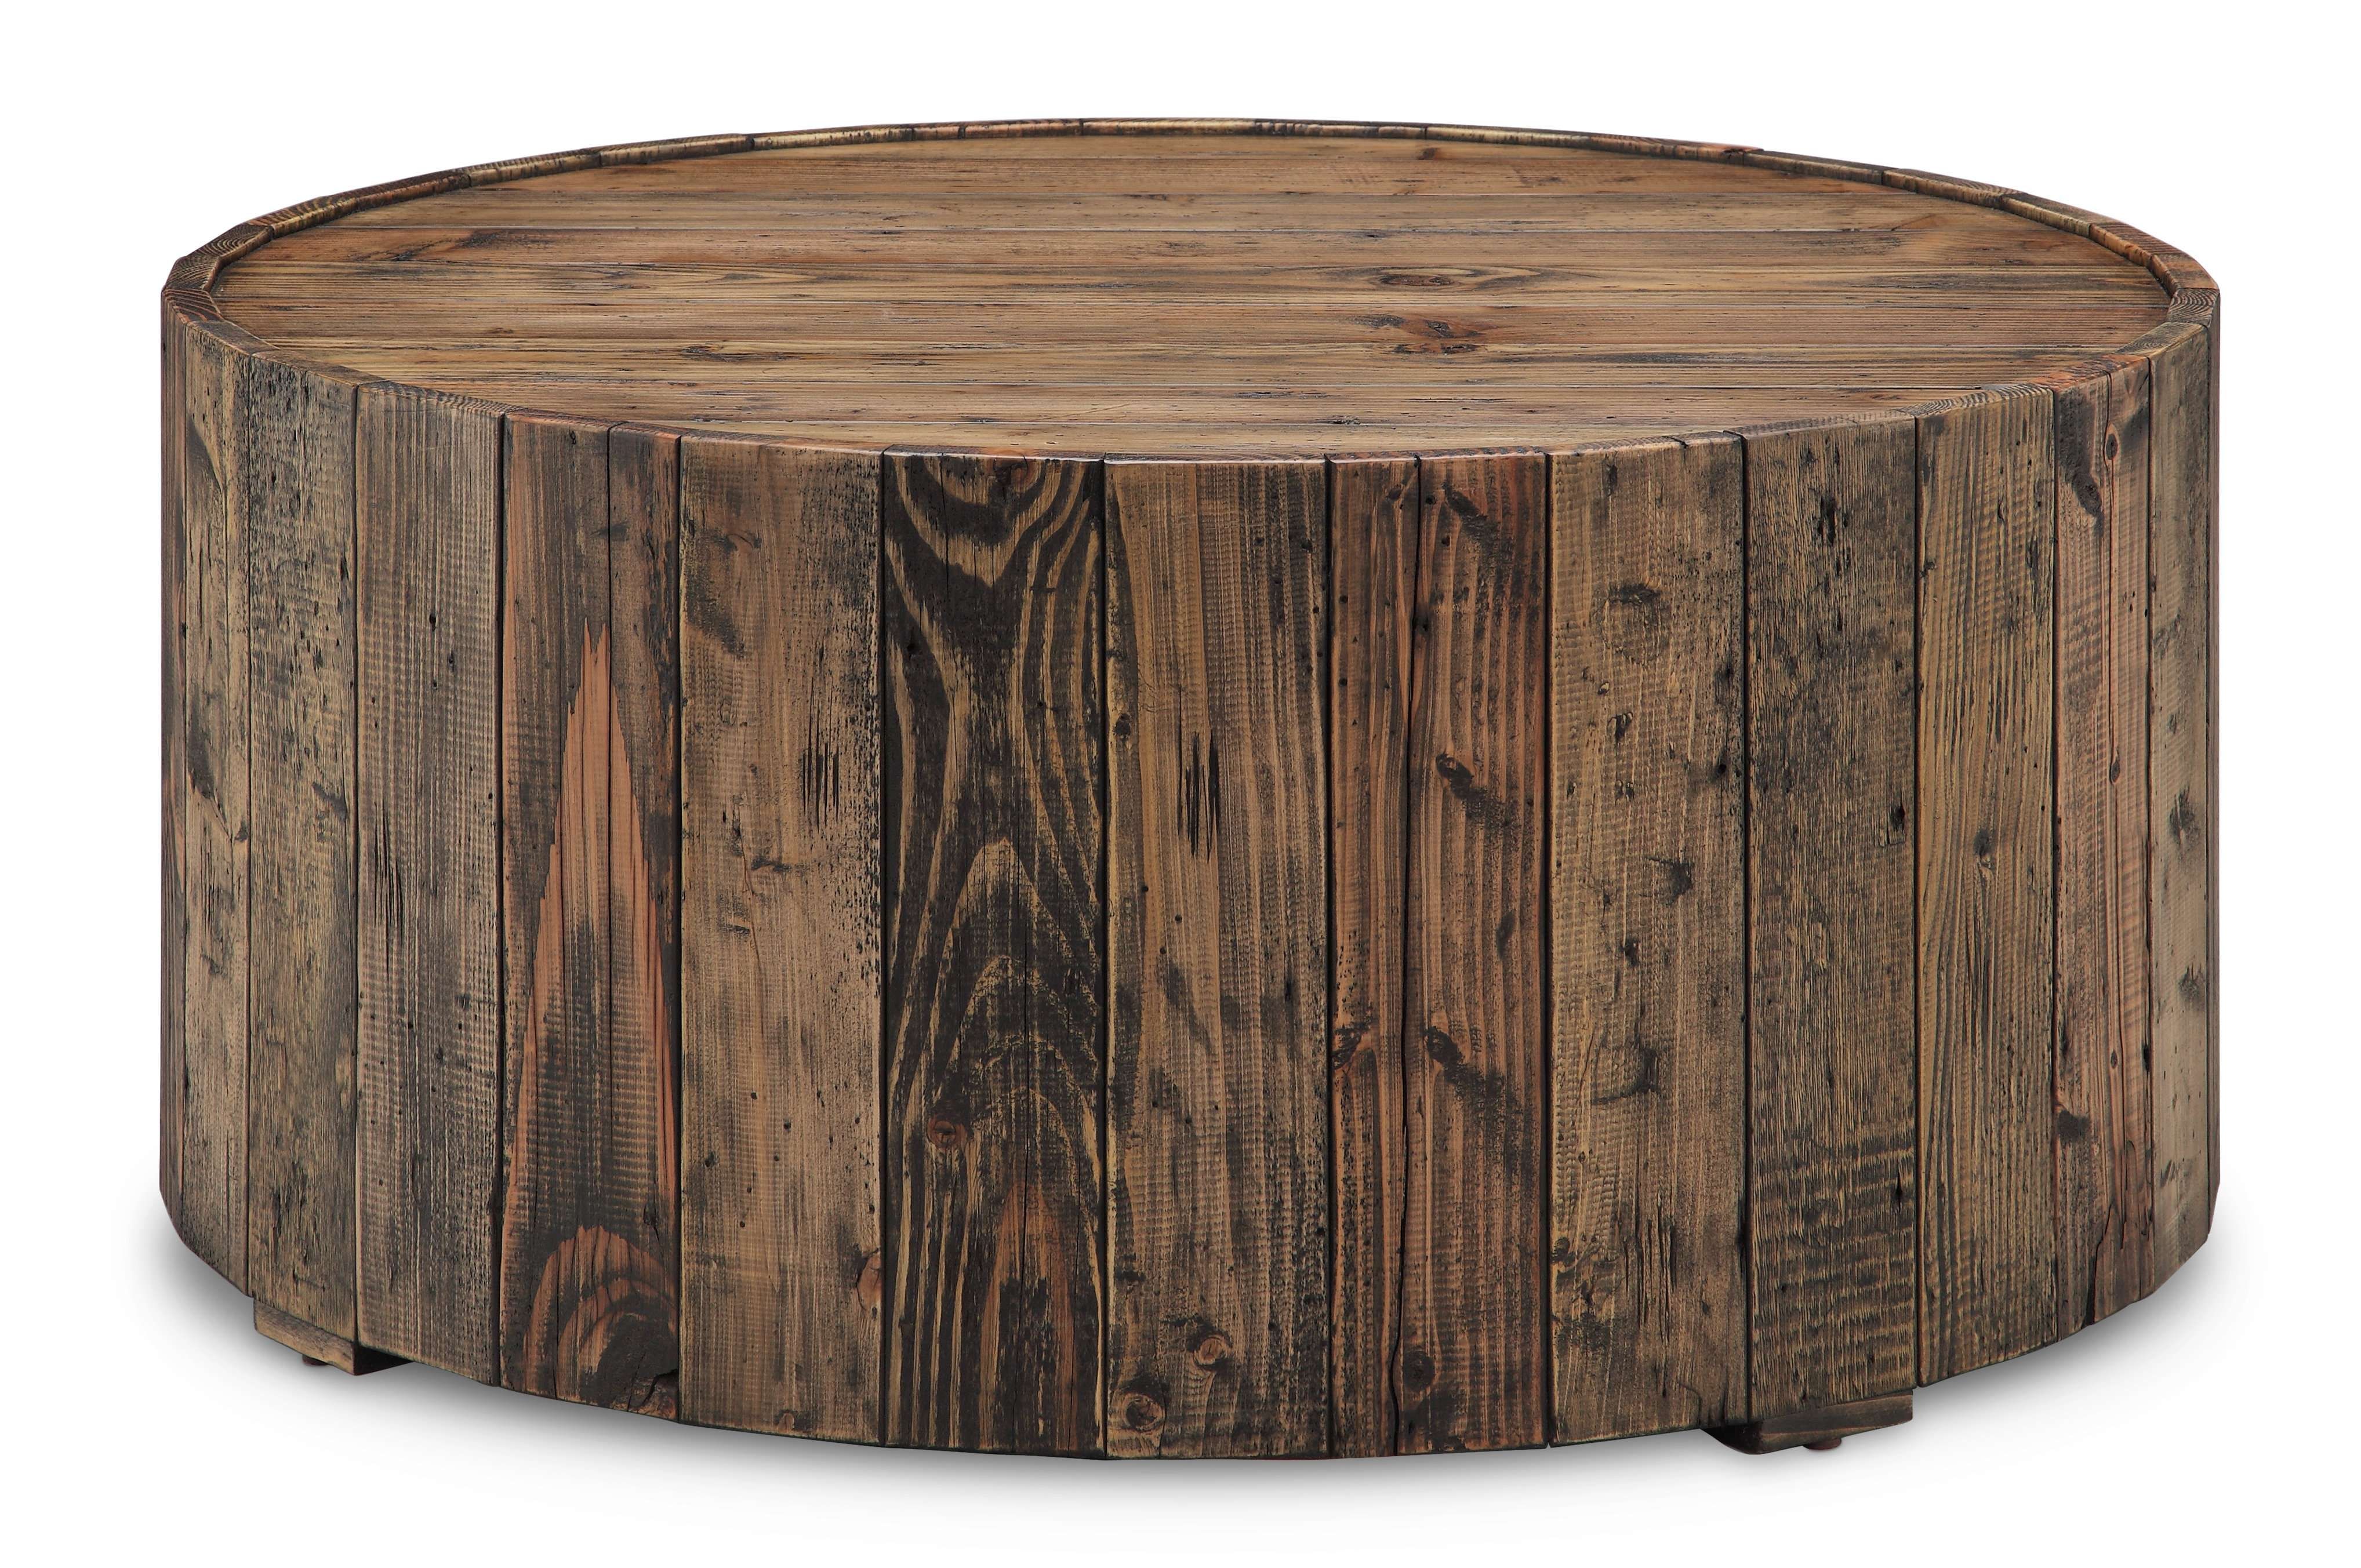 Birch Lane Pertaining To Well Known Chunky Rustic Coffee Tables (View 14 of 20)